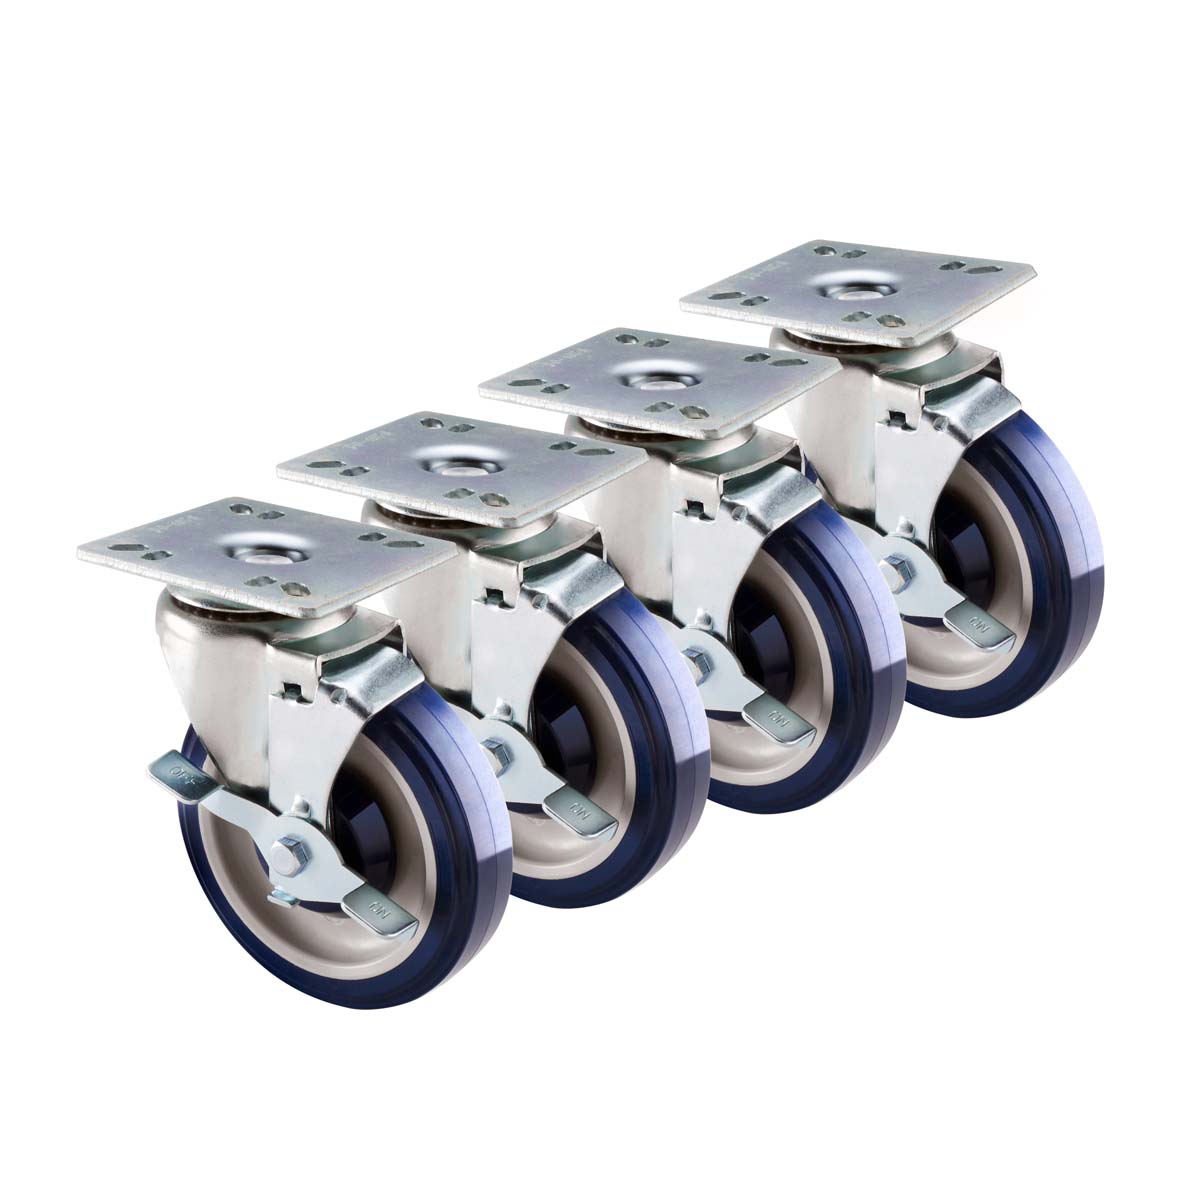 Krowne Metal 30-107S Economy Series 4" x 4" Plate Caster with 5" Wheel (Set of 4)